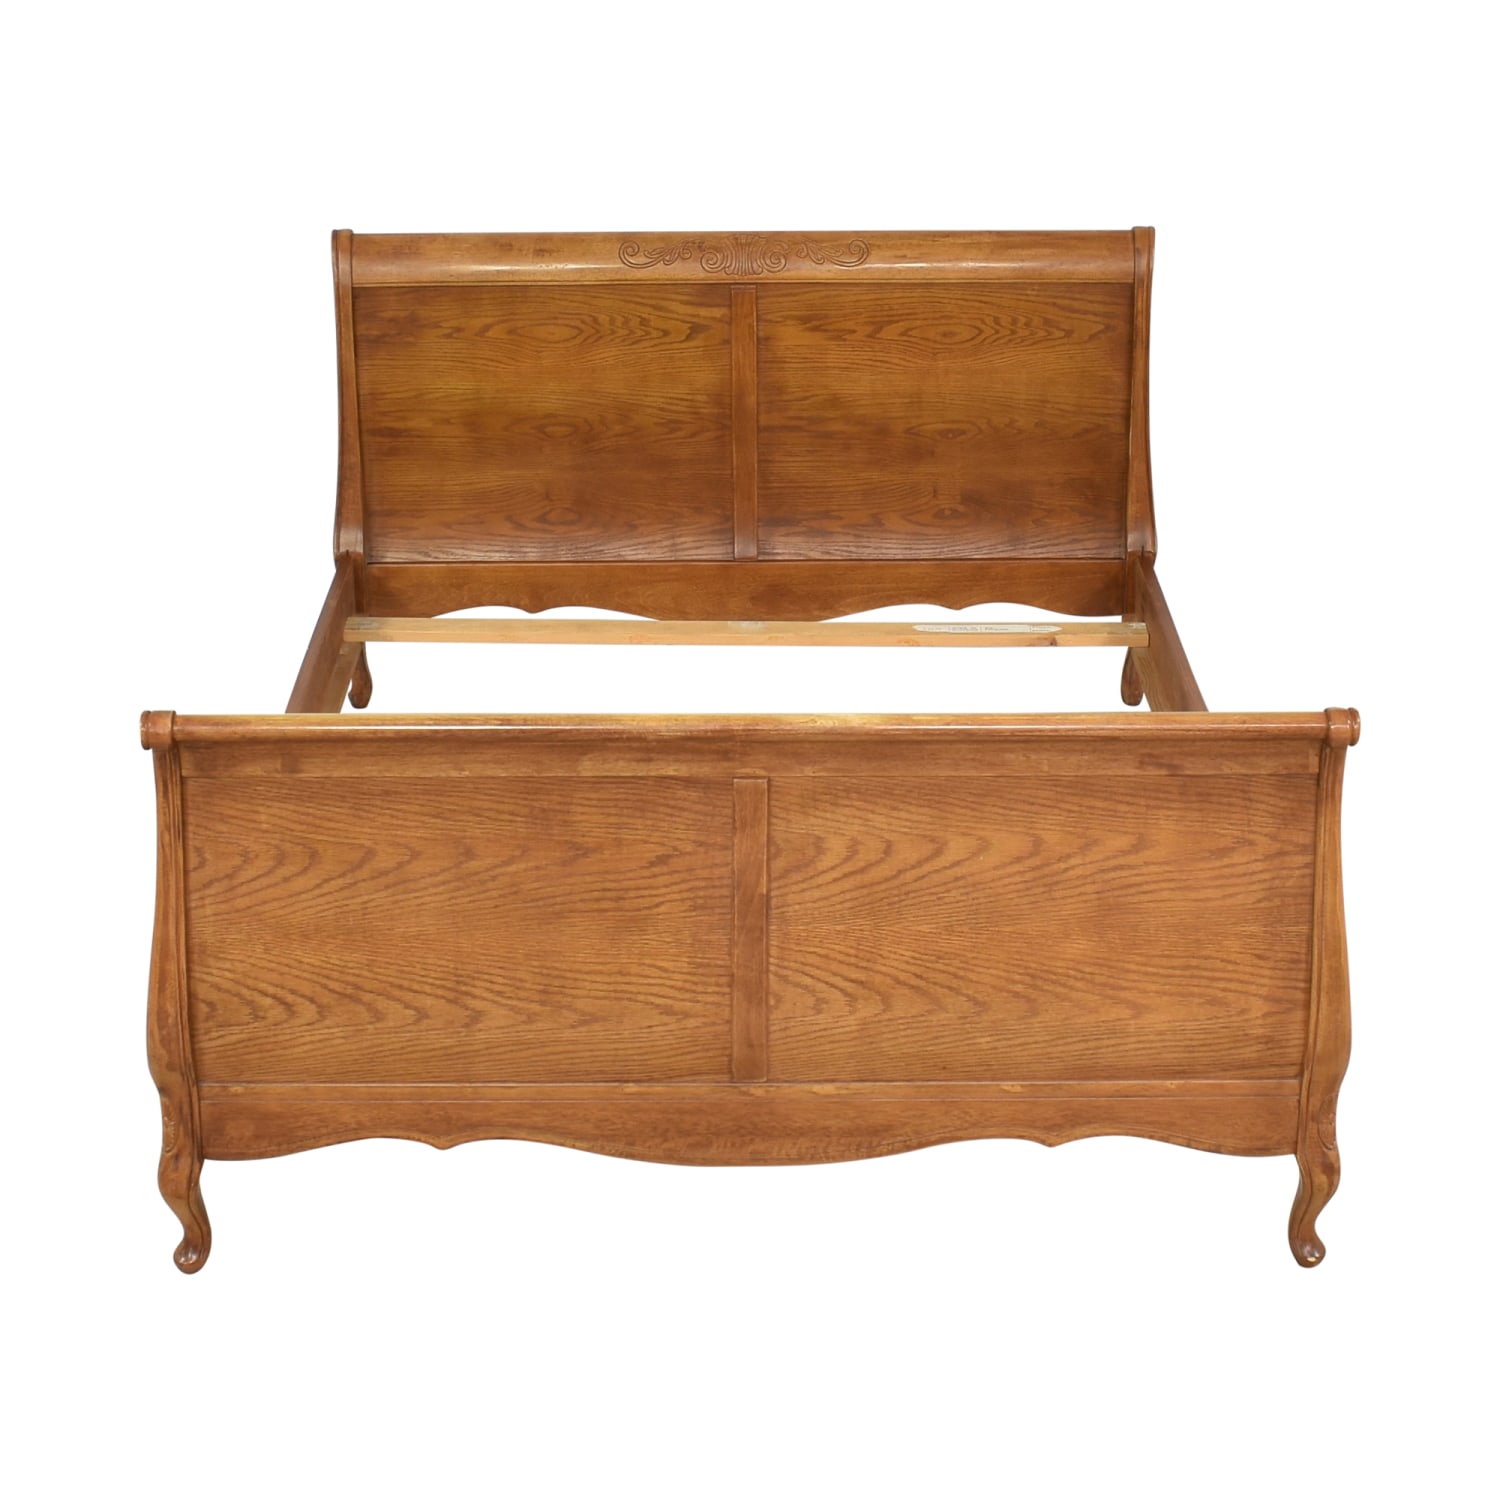 French Provincial Style Queen Sleigh Bed | 47% Off | Kaiyo